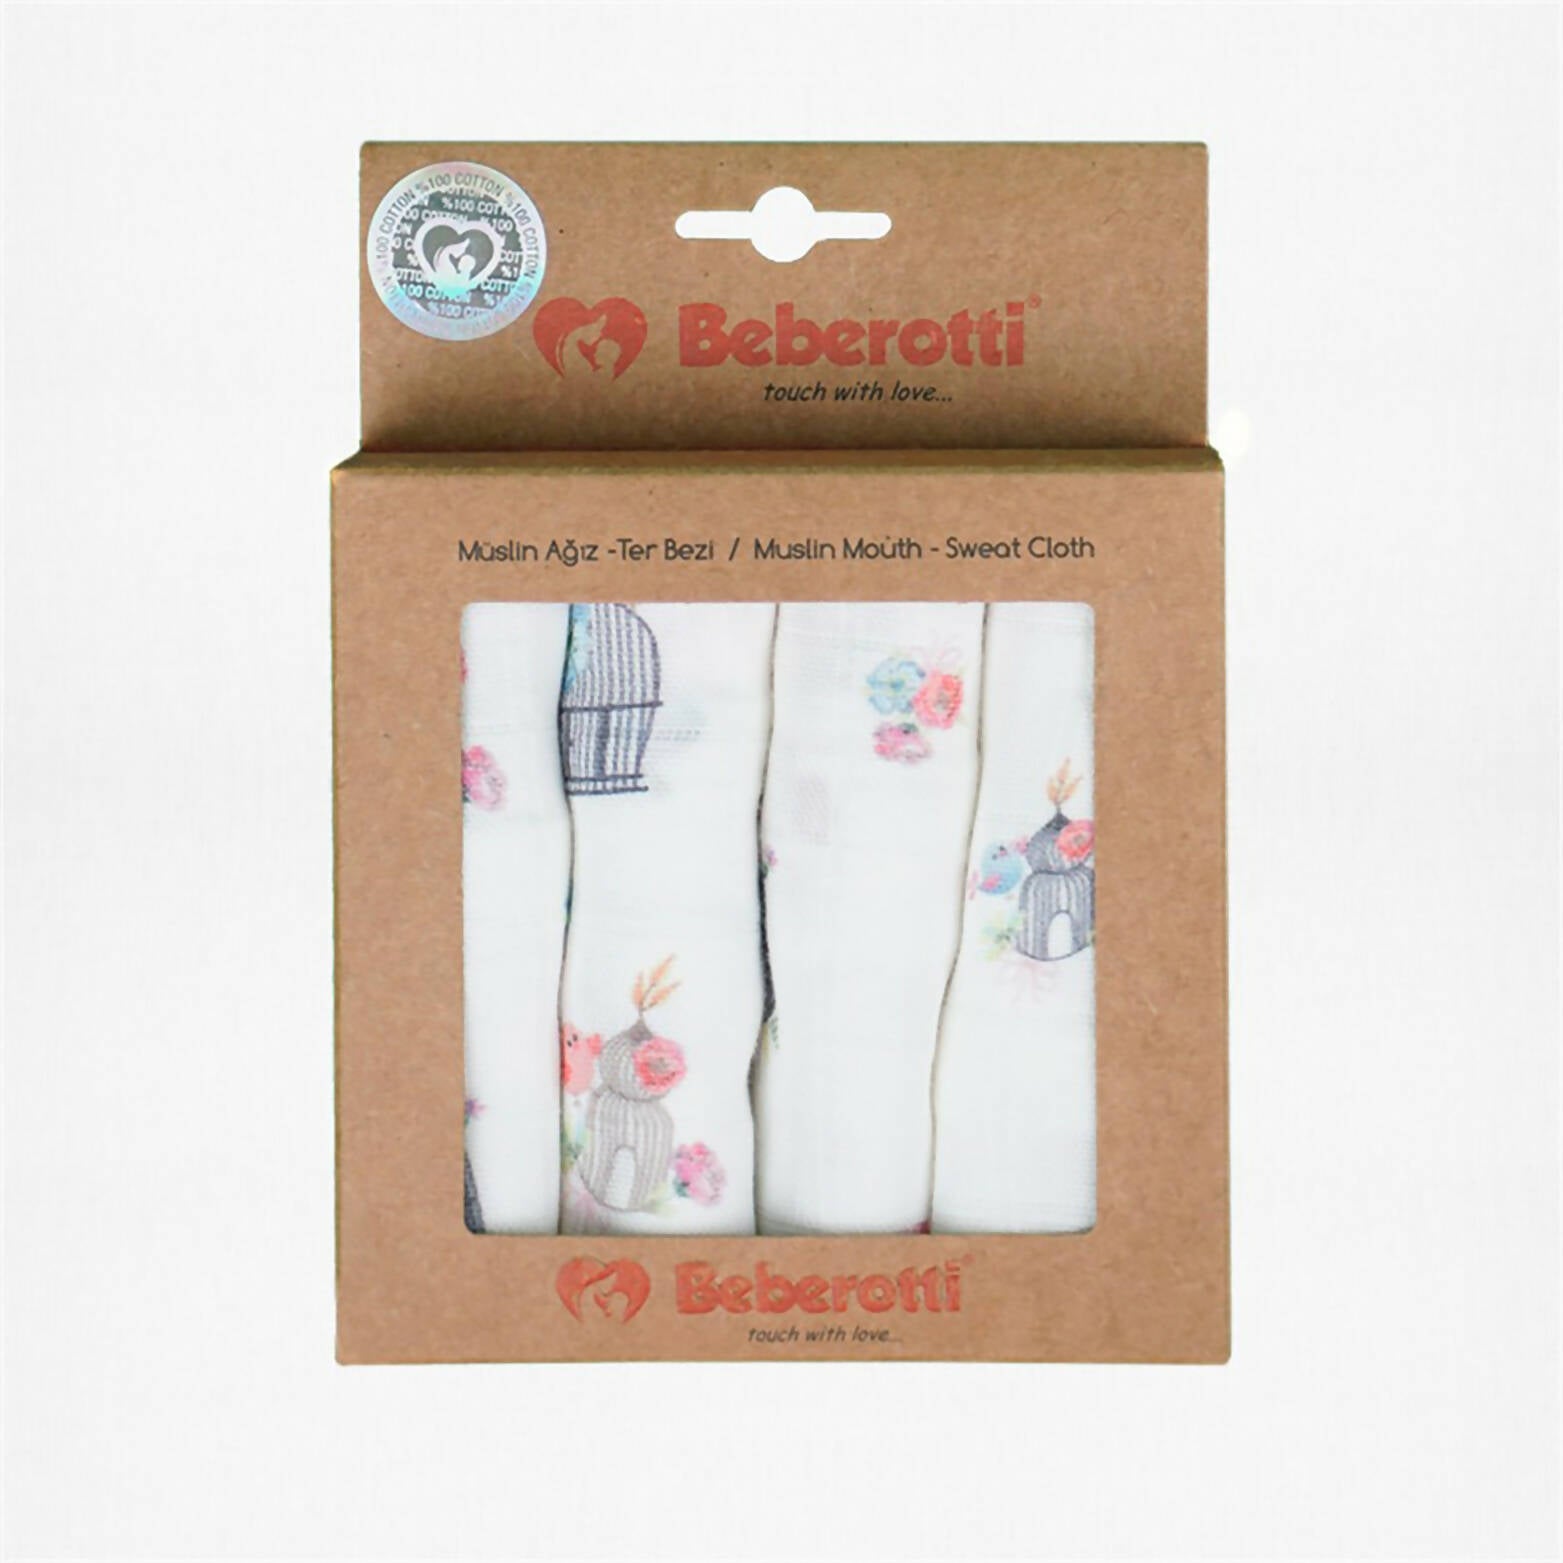 100% Cotton Muslin - Baby Washcloths, 2 Layer Ultra Soft, Absorbent Baby Wipes, Nursing Cloth (4 Pack Boxed Sets) Newborn Muslin Baby Bath or Face Towel 9.85" x 9.85" Printed Patterns - Wear Sierra